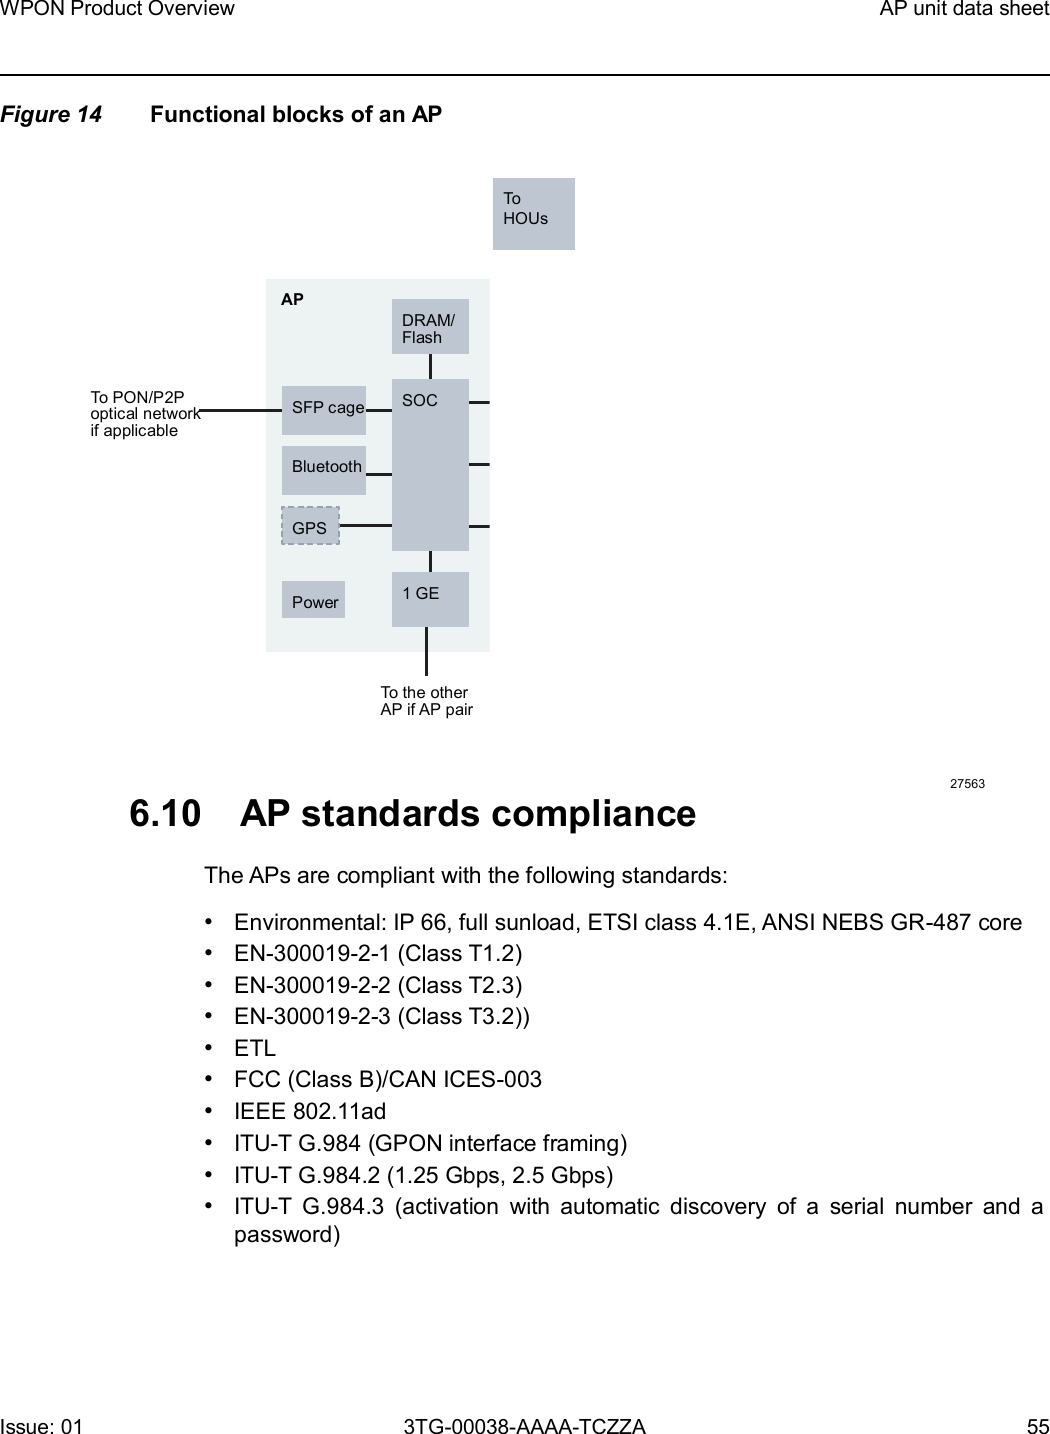 Page 55 of Nokia Bell 7577WPONAPAC WPON User Manual WPON Product Overview